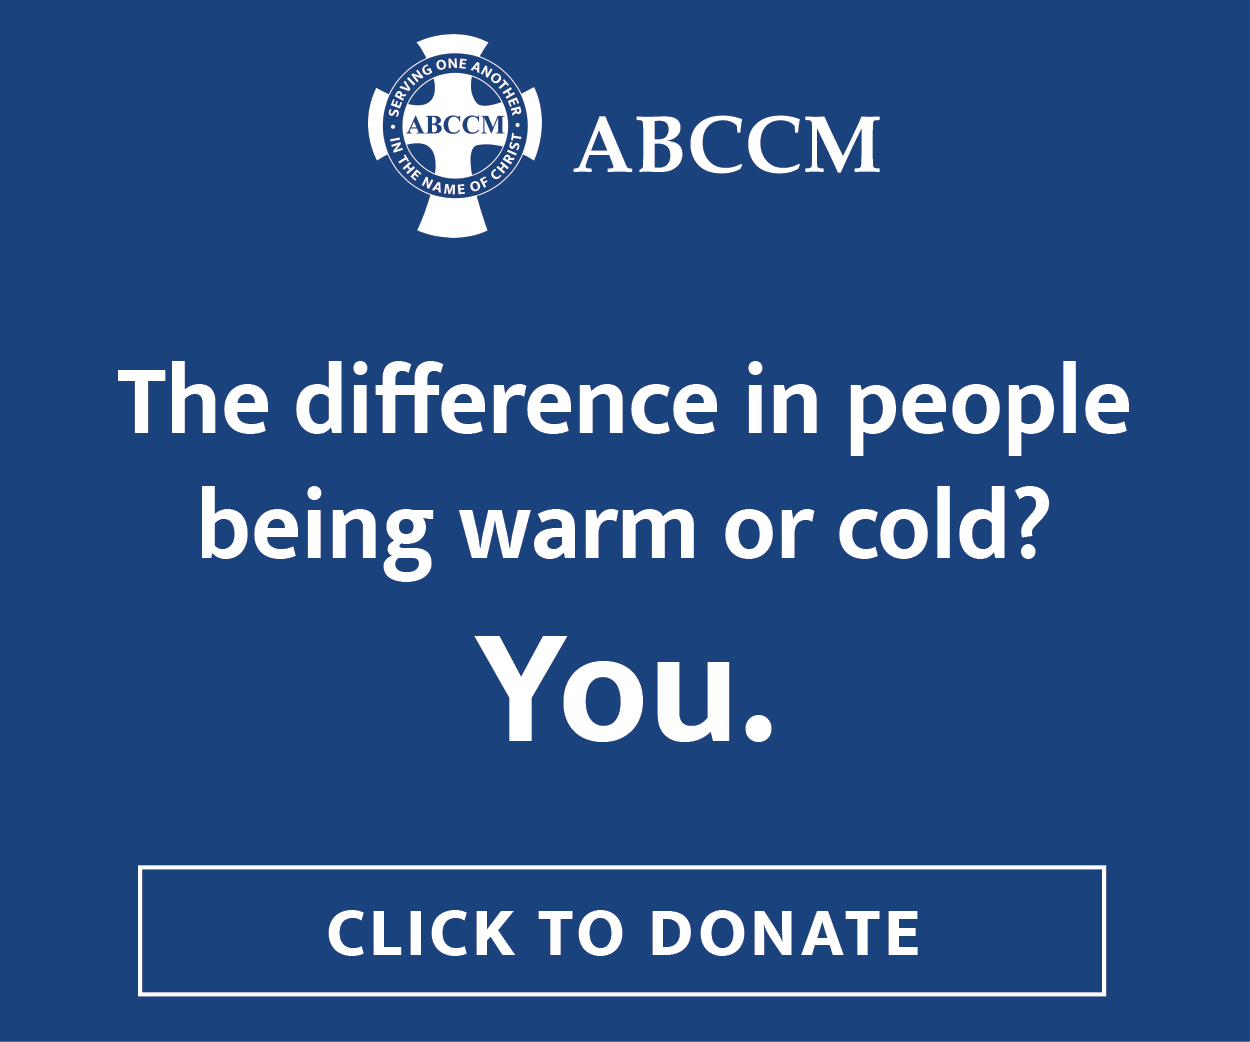 ABCCM_safewarm_300x250_difference.png